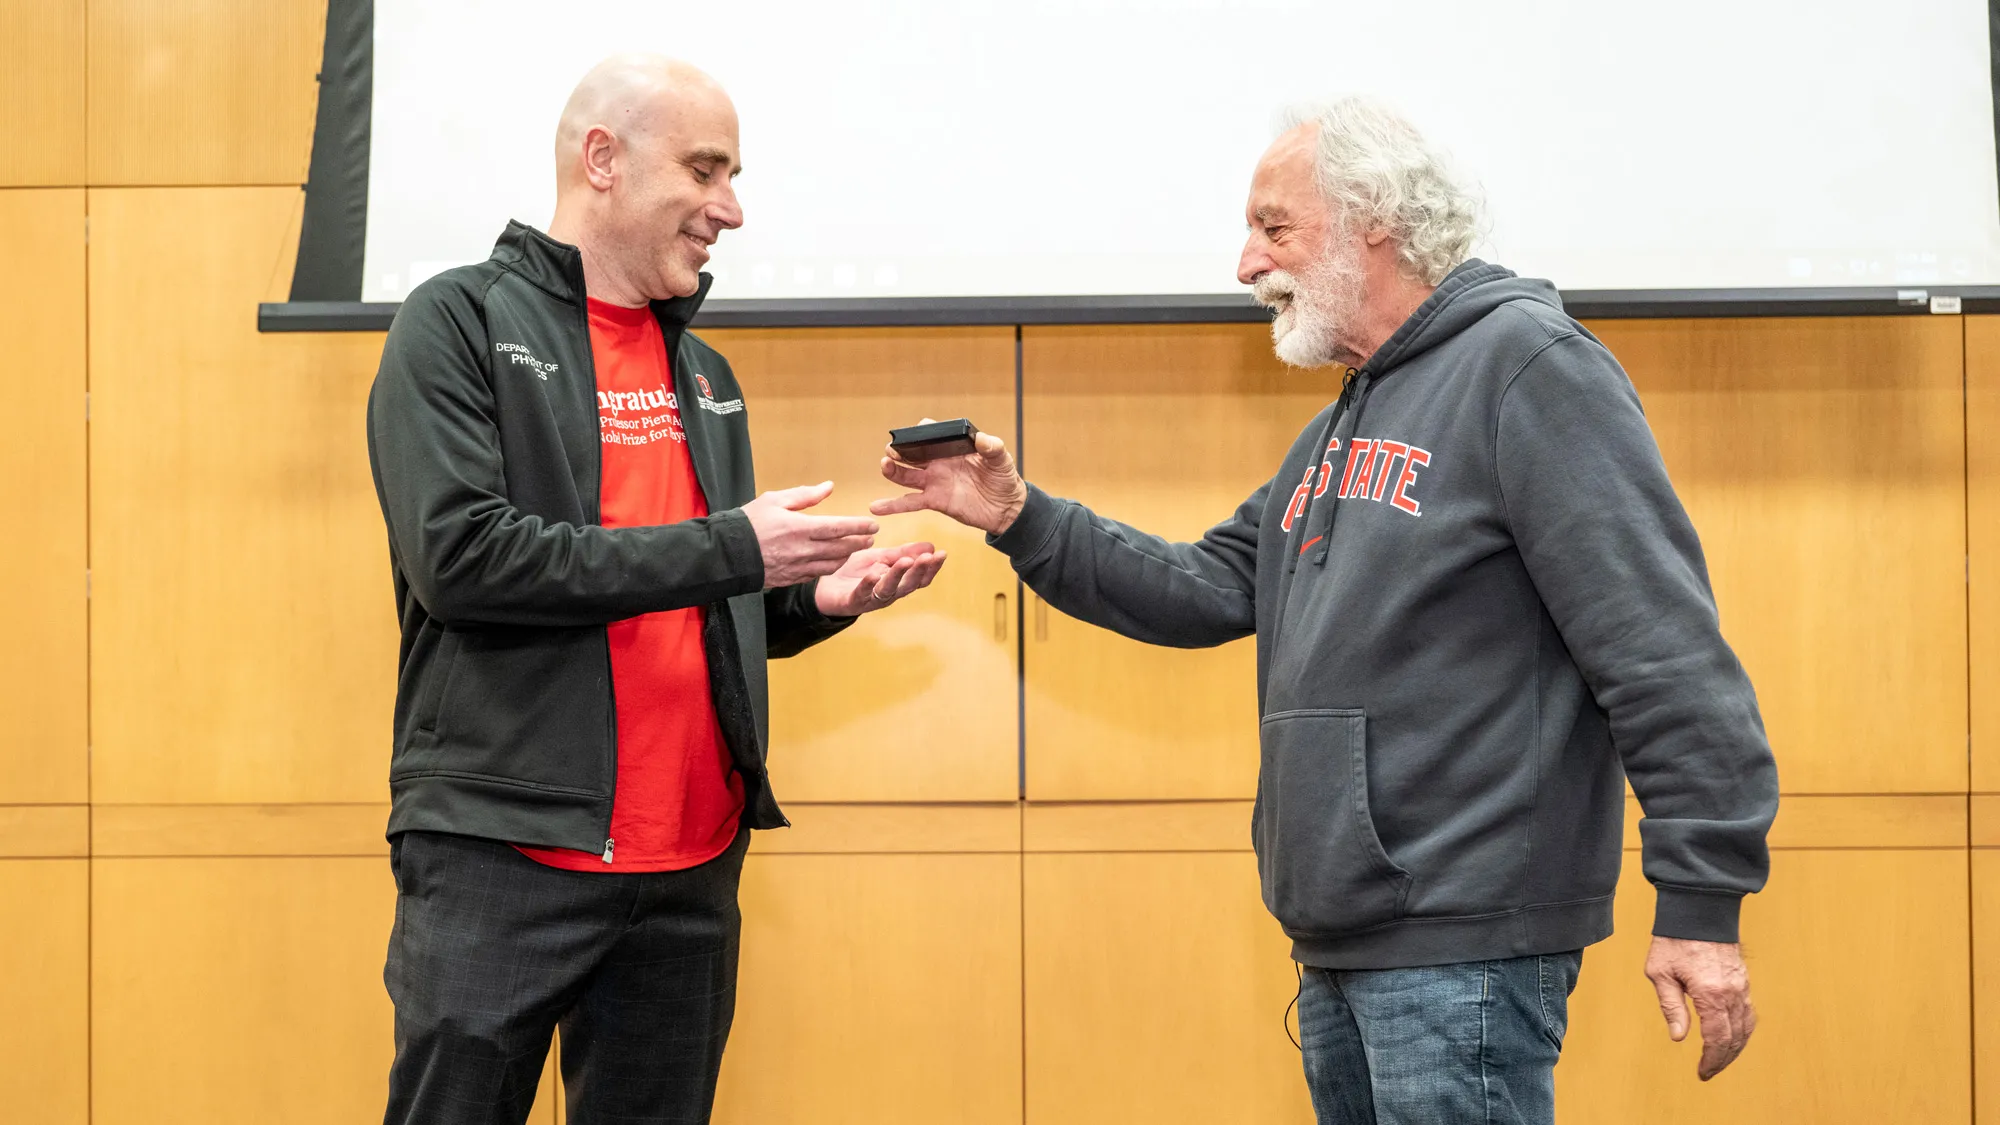 Standing at the front of a wood-paneled conference room, Agostini (wearing his favorite Ohio State sweatshirt) hands a palm-sized, shallow box to Michael Poirer, the head of the Physics Department. Poirer, a white man with a shaved head, reaches to accept it. The inside can’t be seen, but it holds a replica of Agostini’s Nobel Prize medal. 